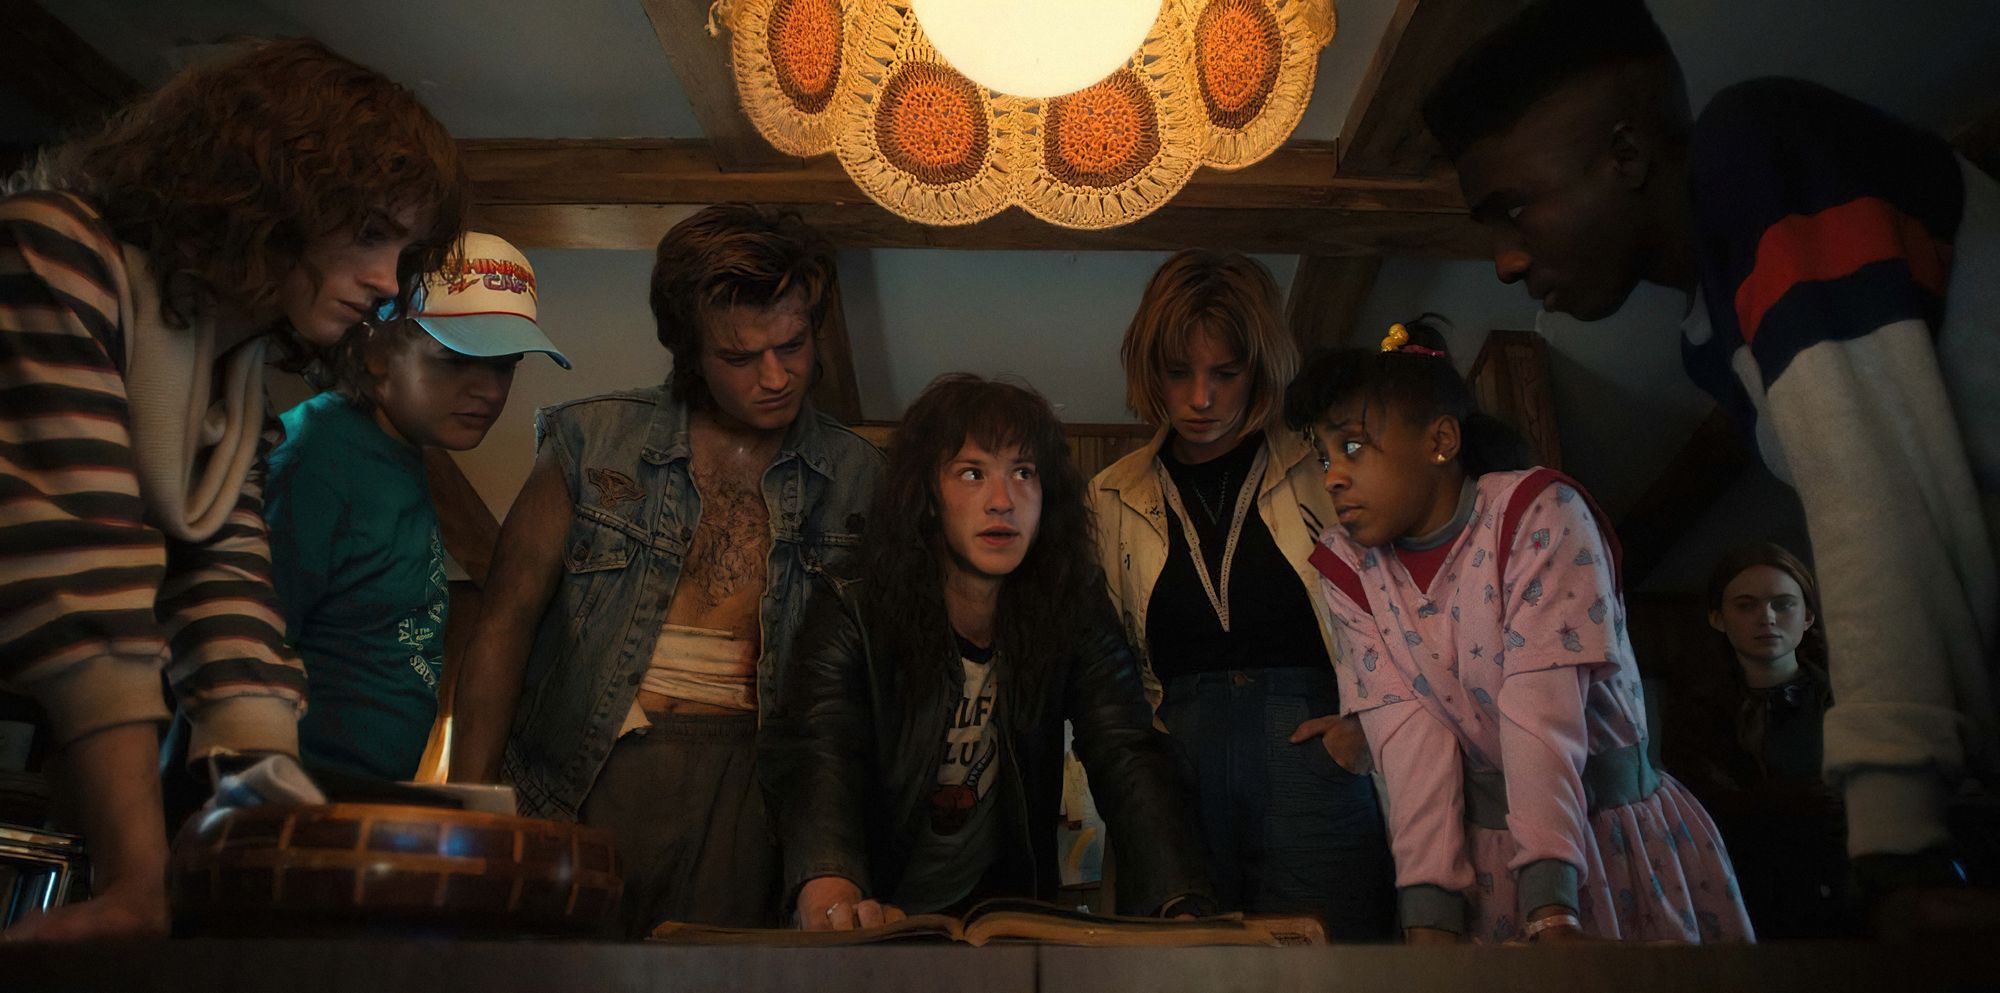 Stranger Things S4 Vol 2, though captivating, struggles to keep up with its  momentum